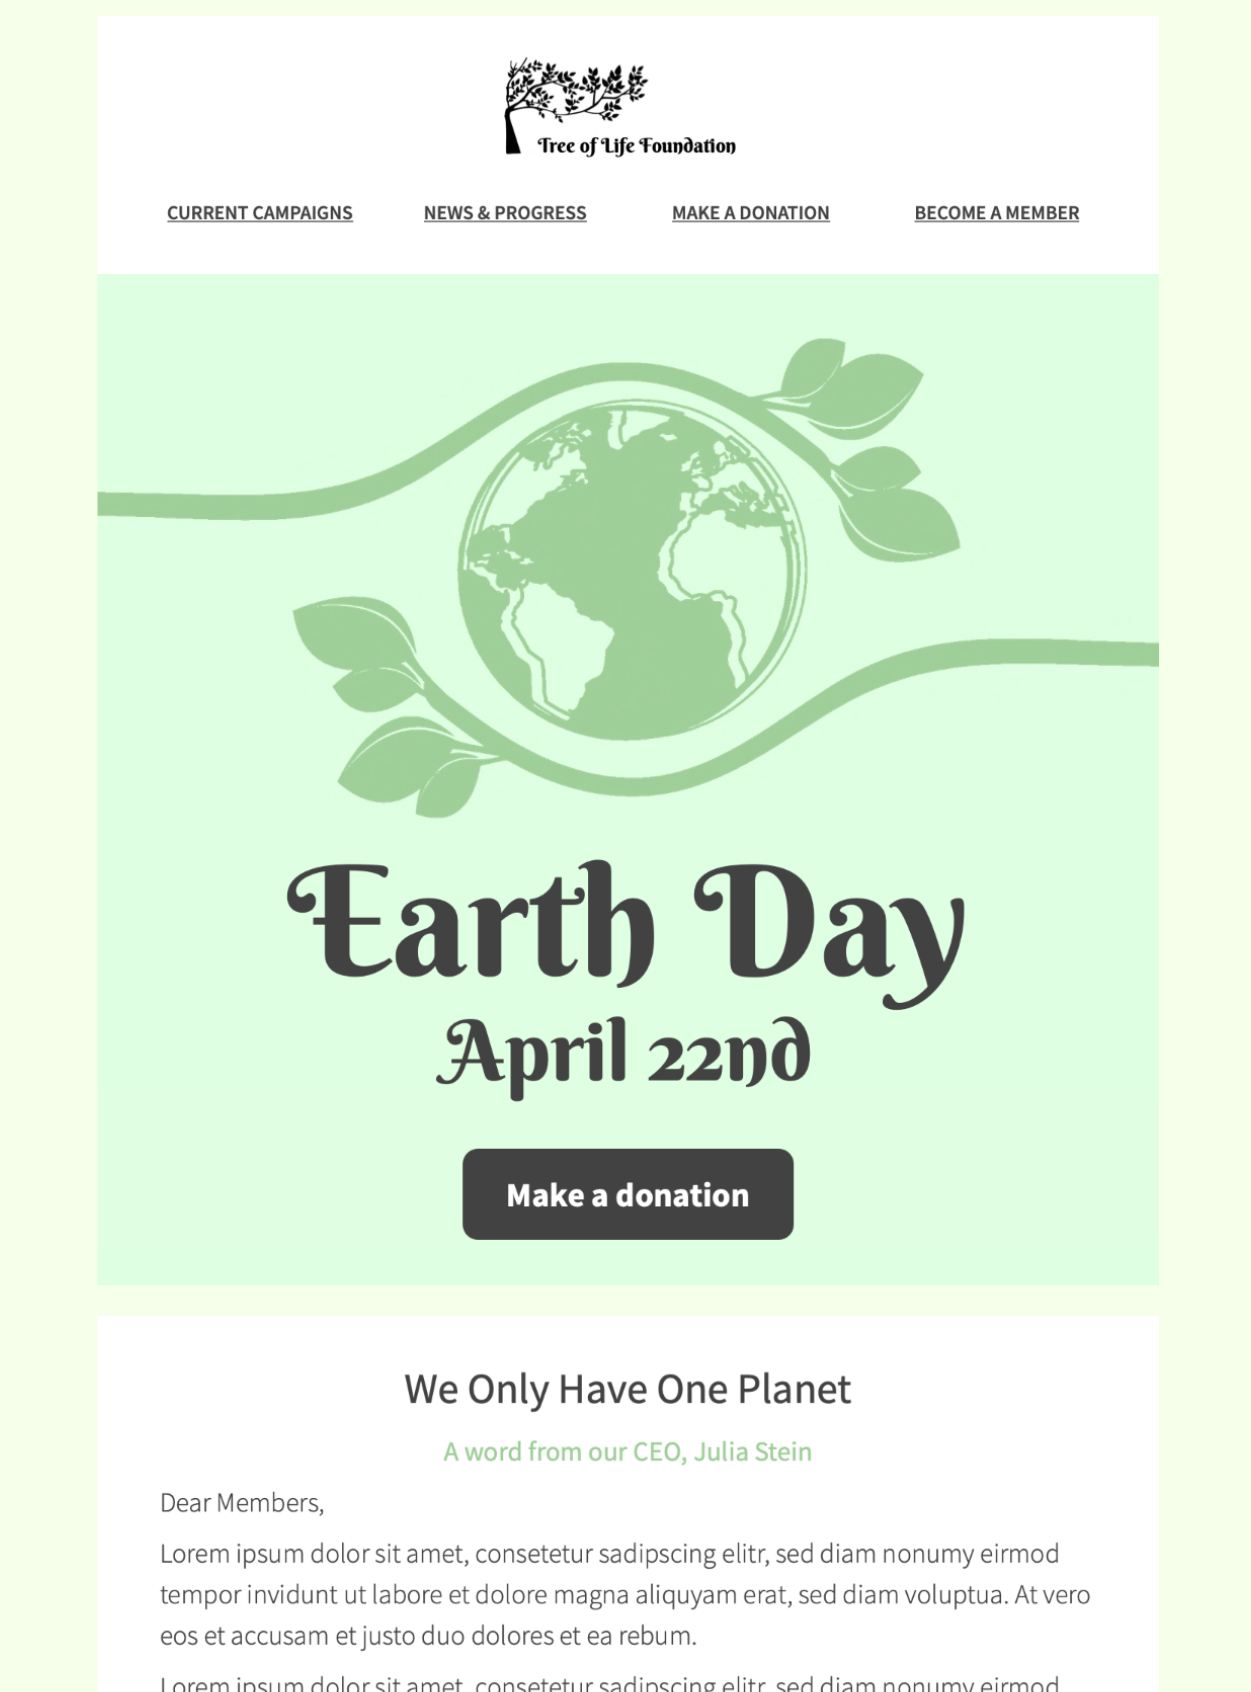 html email design for earth day